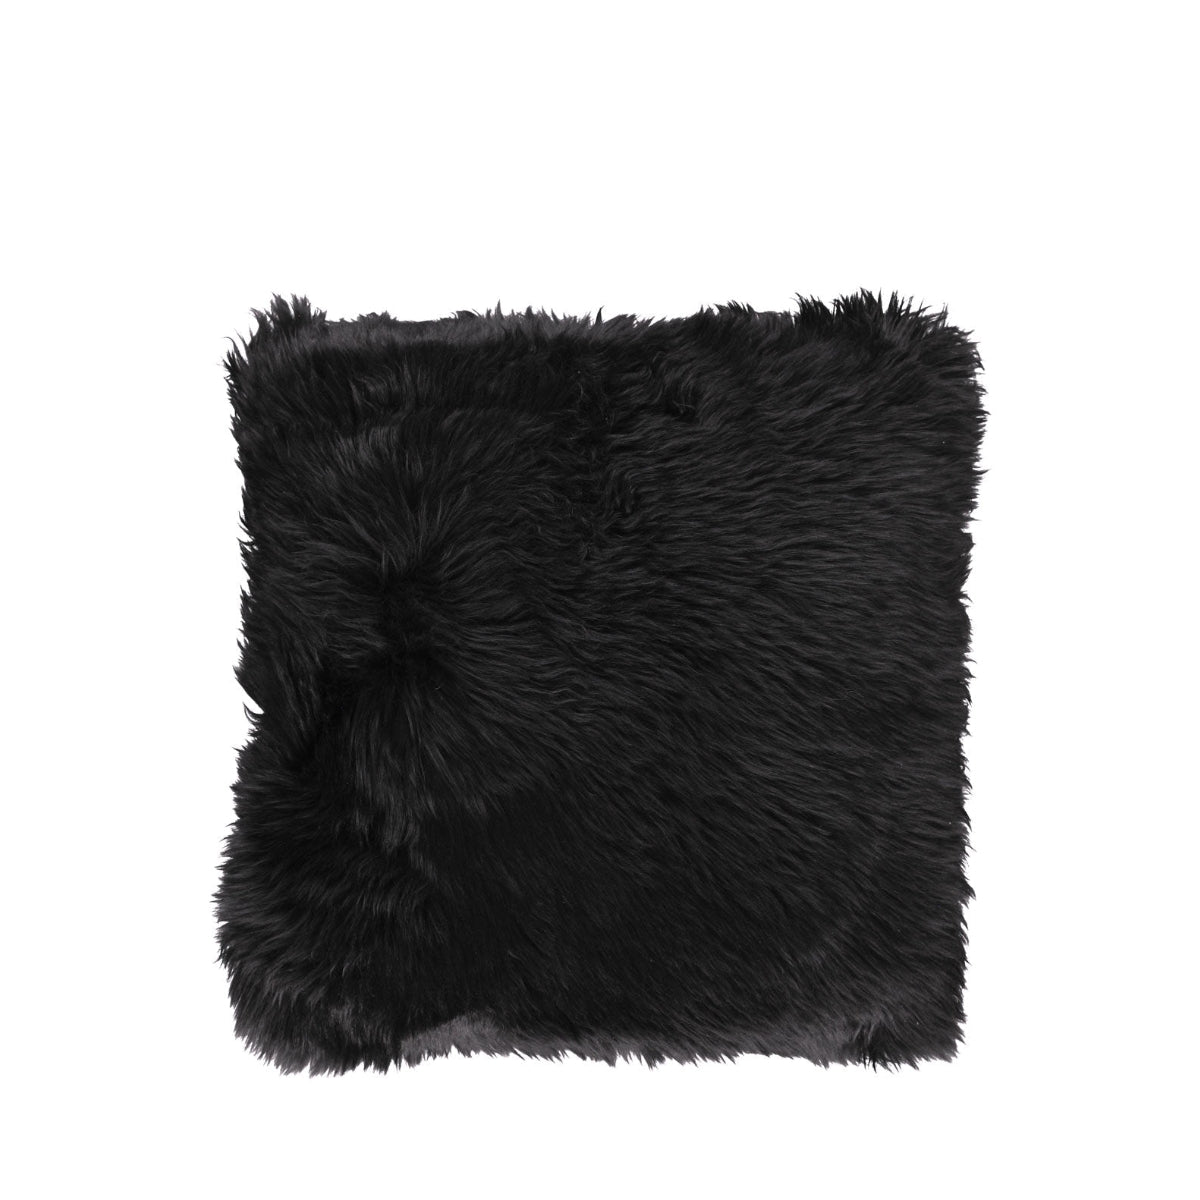 Natures Collection | Coral Collection Cushion – Long Wool Sheepskin, 45x45